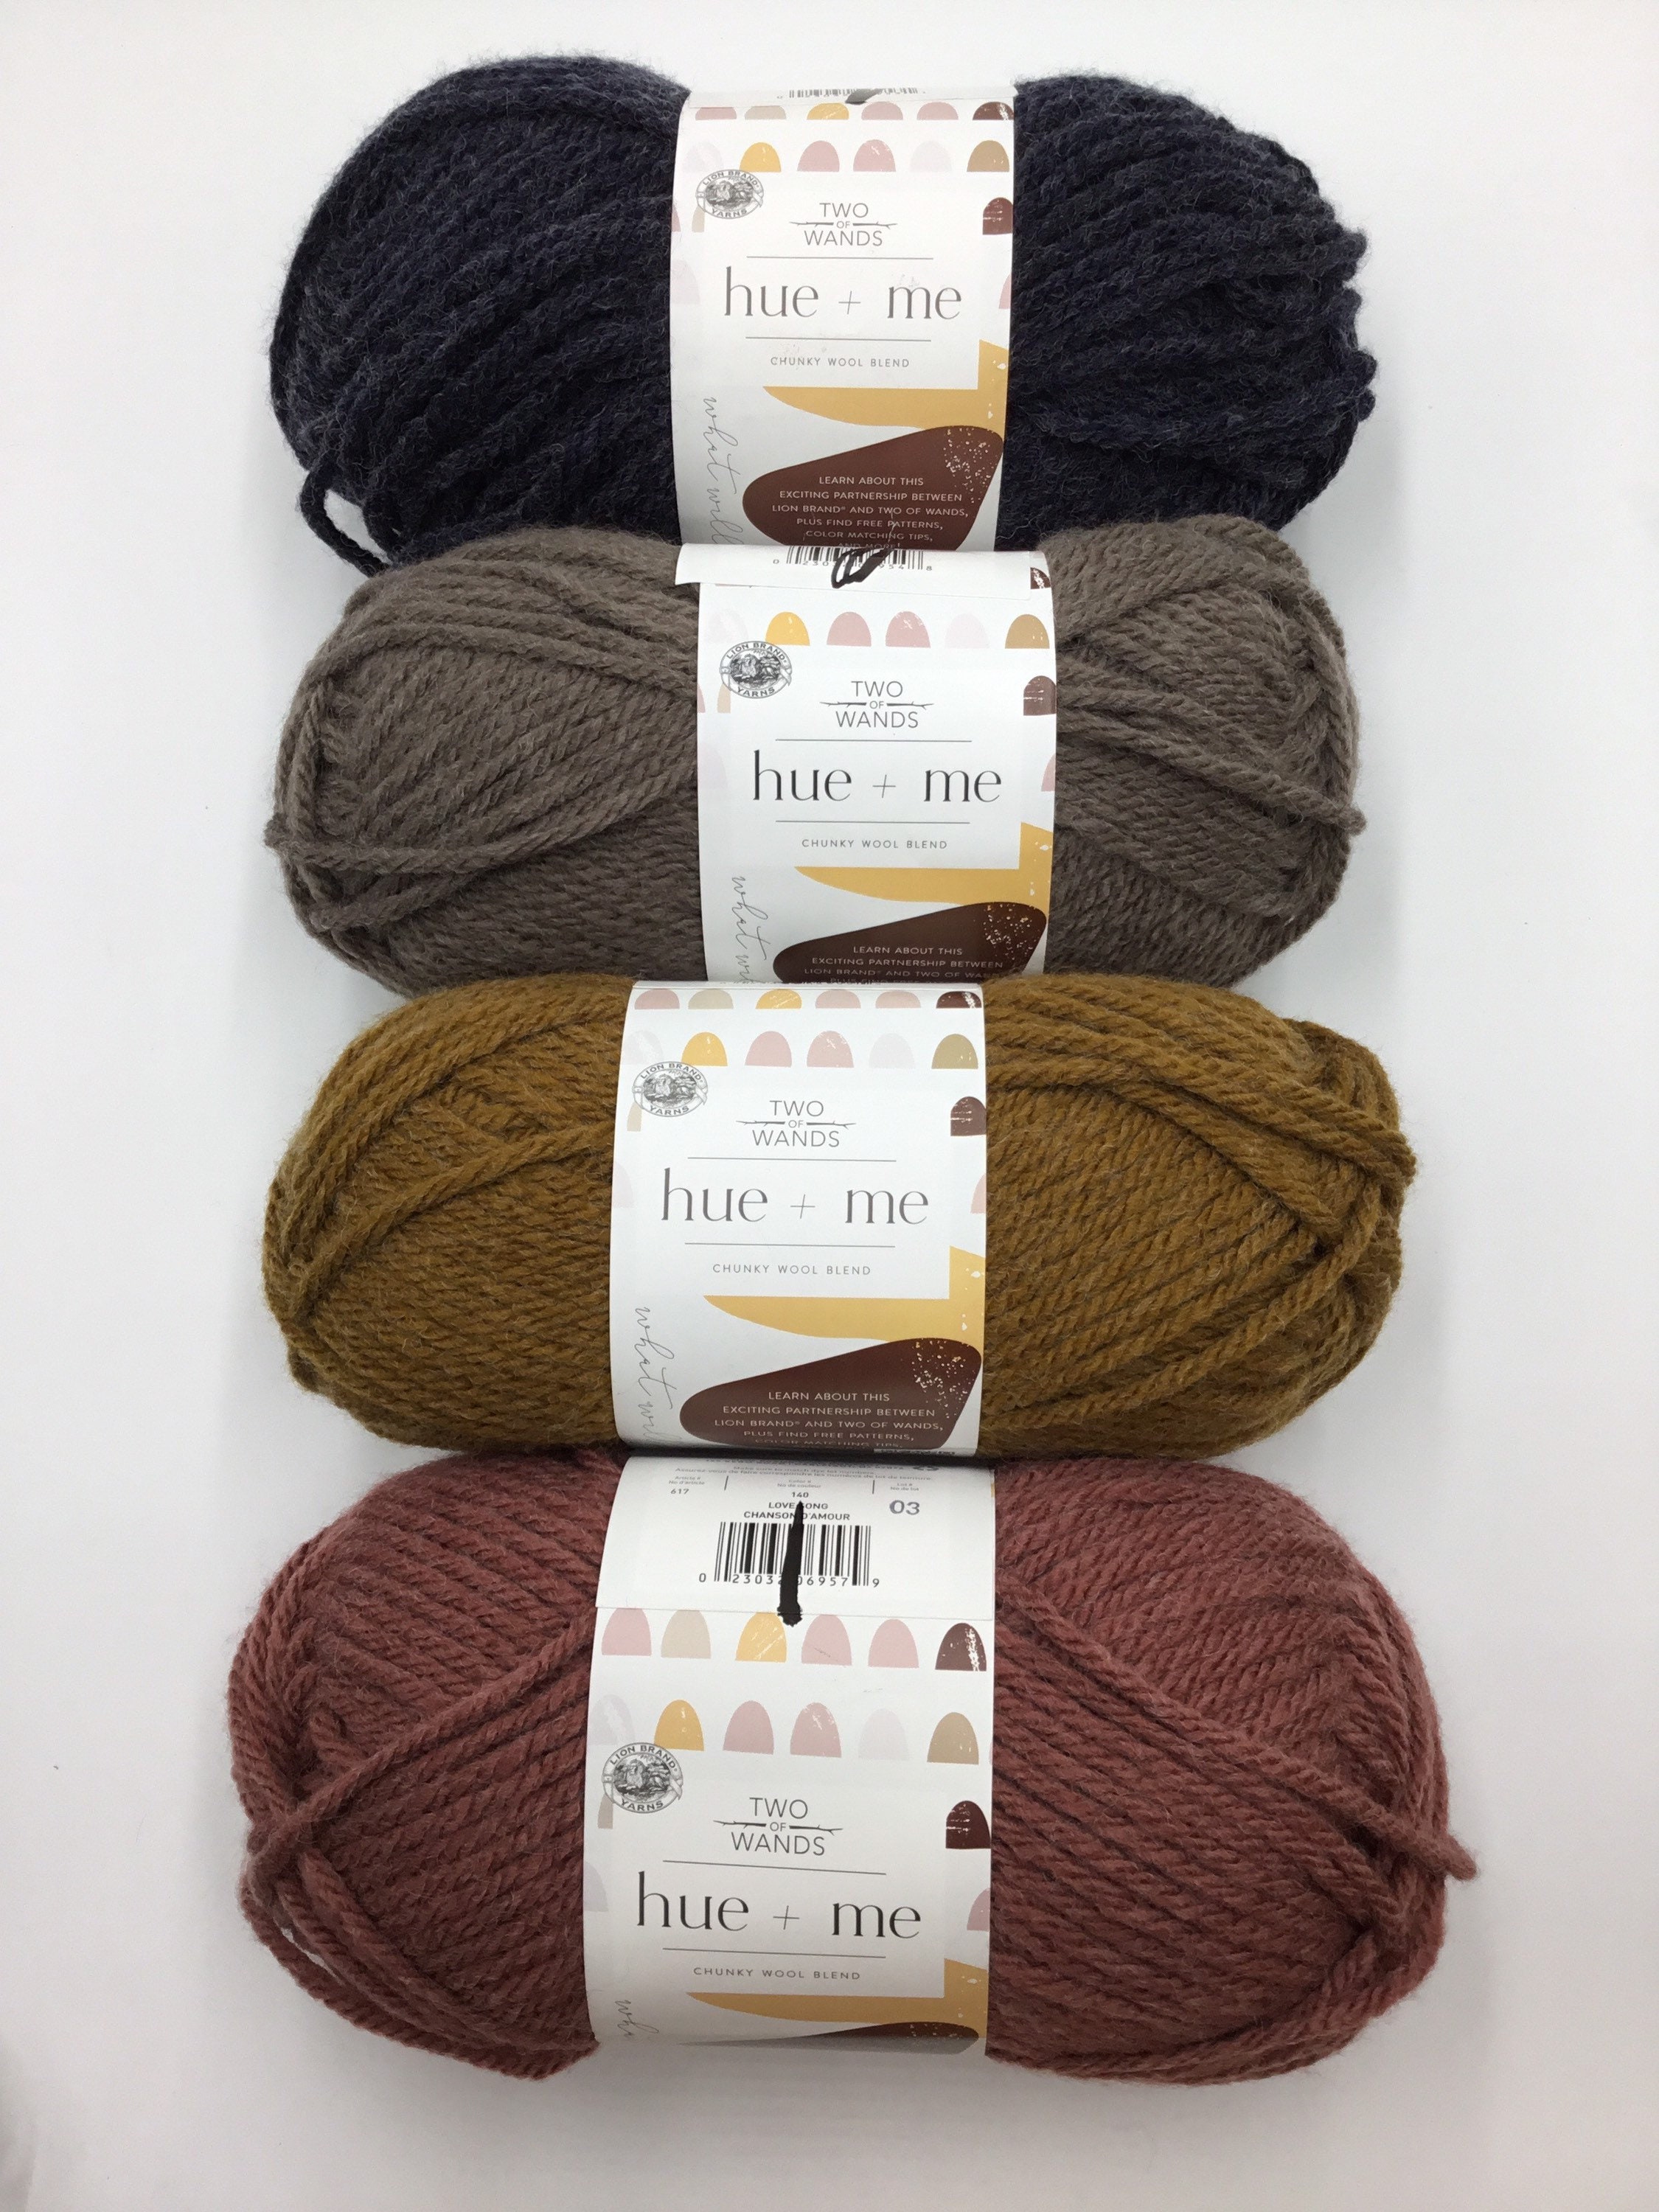  Lion Brand Hue + Me Yarn for Knitting, Crocheting, and  Crafting, Bulky and Thick, Soft Acrylic and Wool Yarn, Terra, (1-Pack)